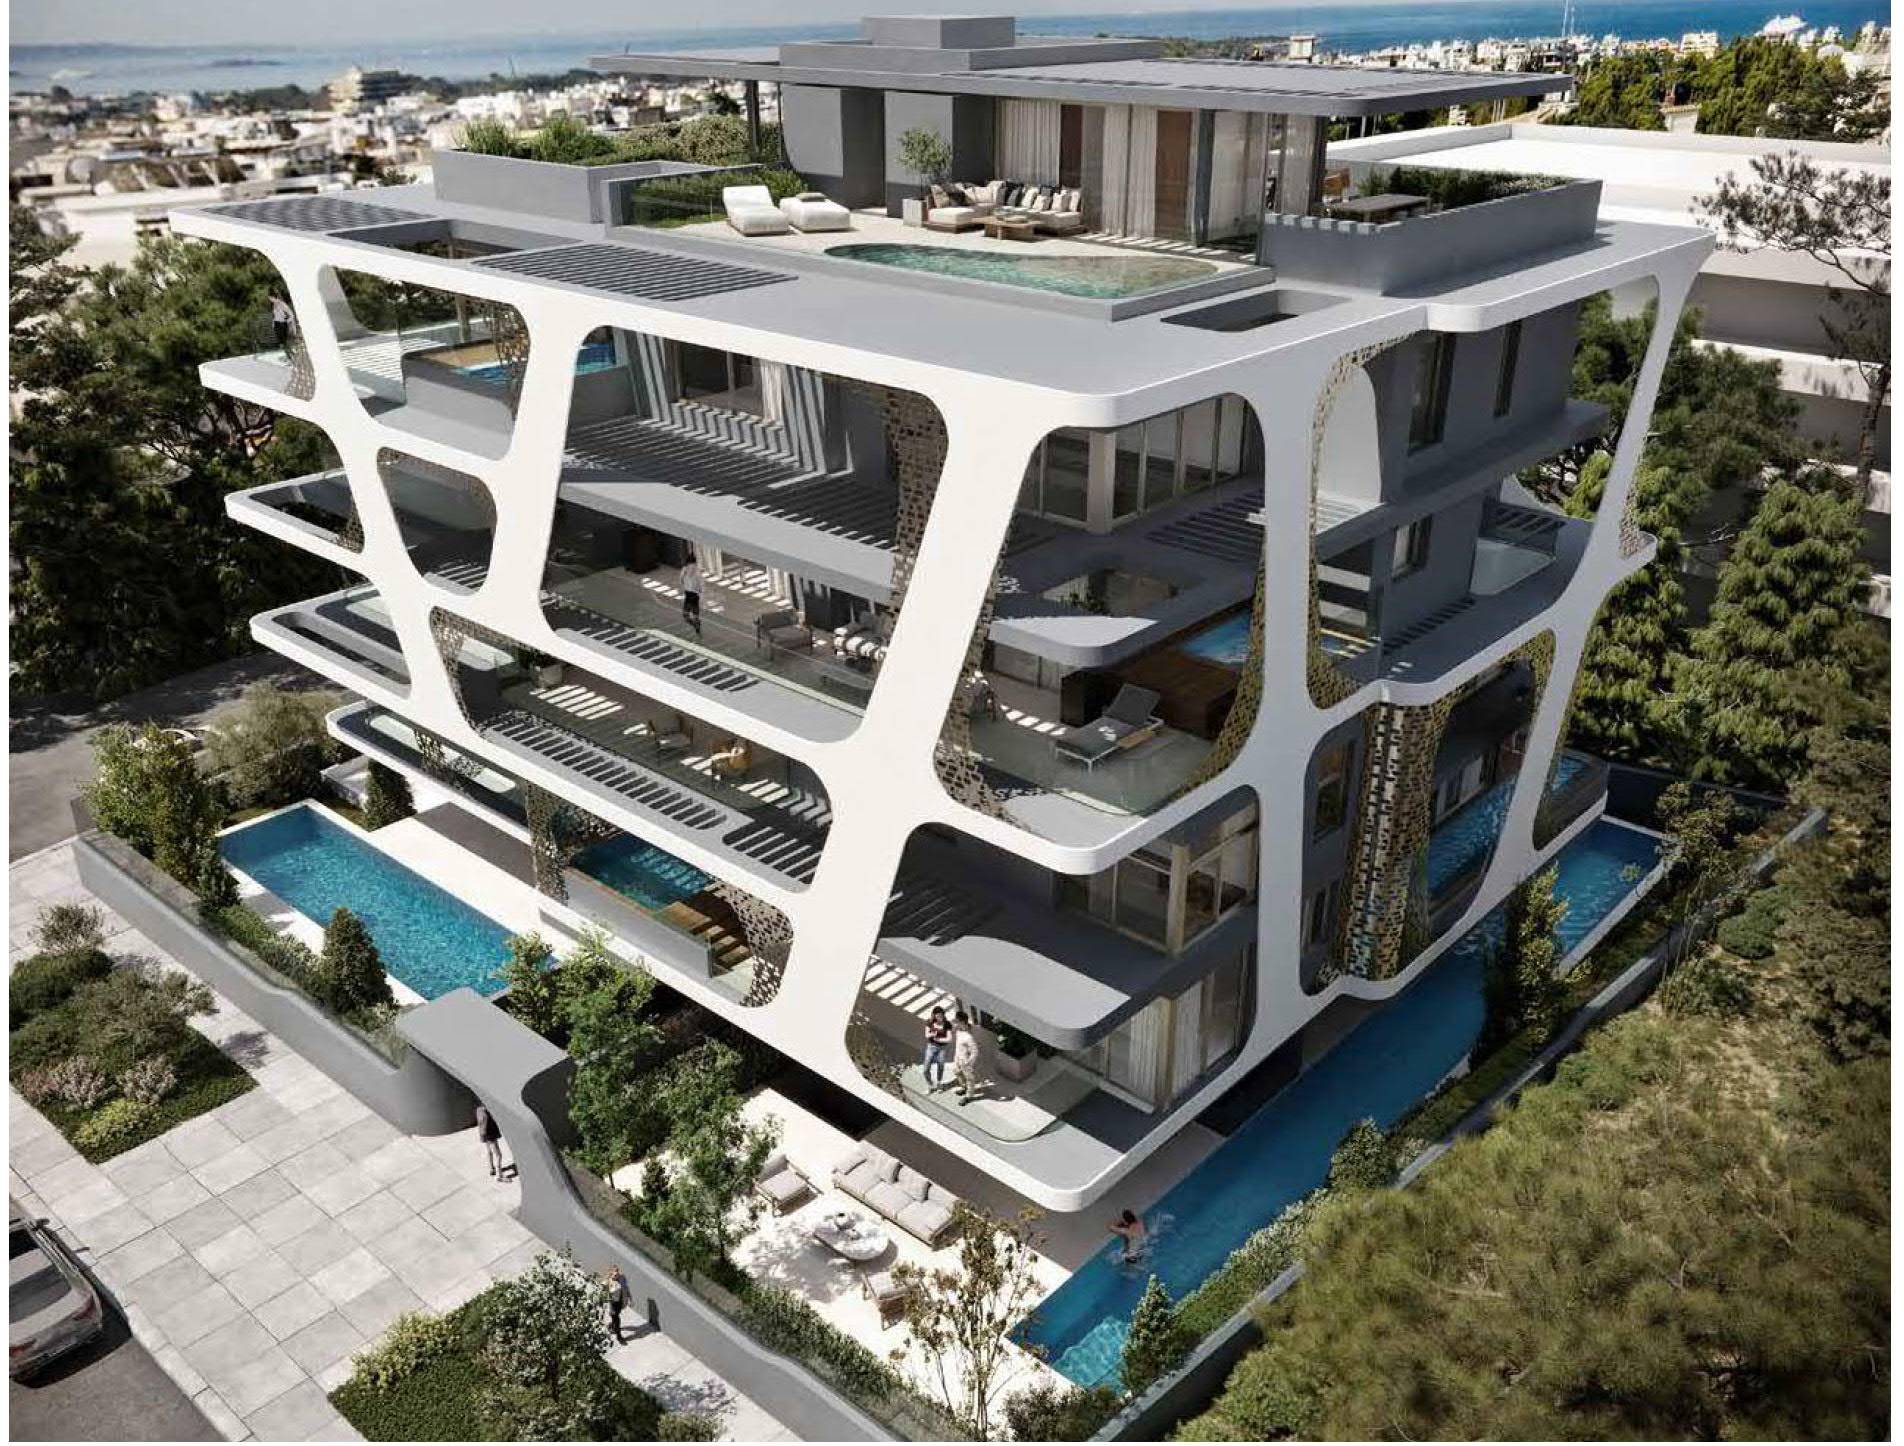 Super luxury 260sqm Triplex, 3rd-4th and 5th floor, in the cosmopolitan seaside suburb of Glyfada, with swimming pool,  Jacuzzi and private Roof Garden